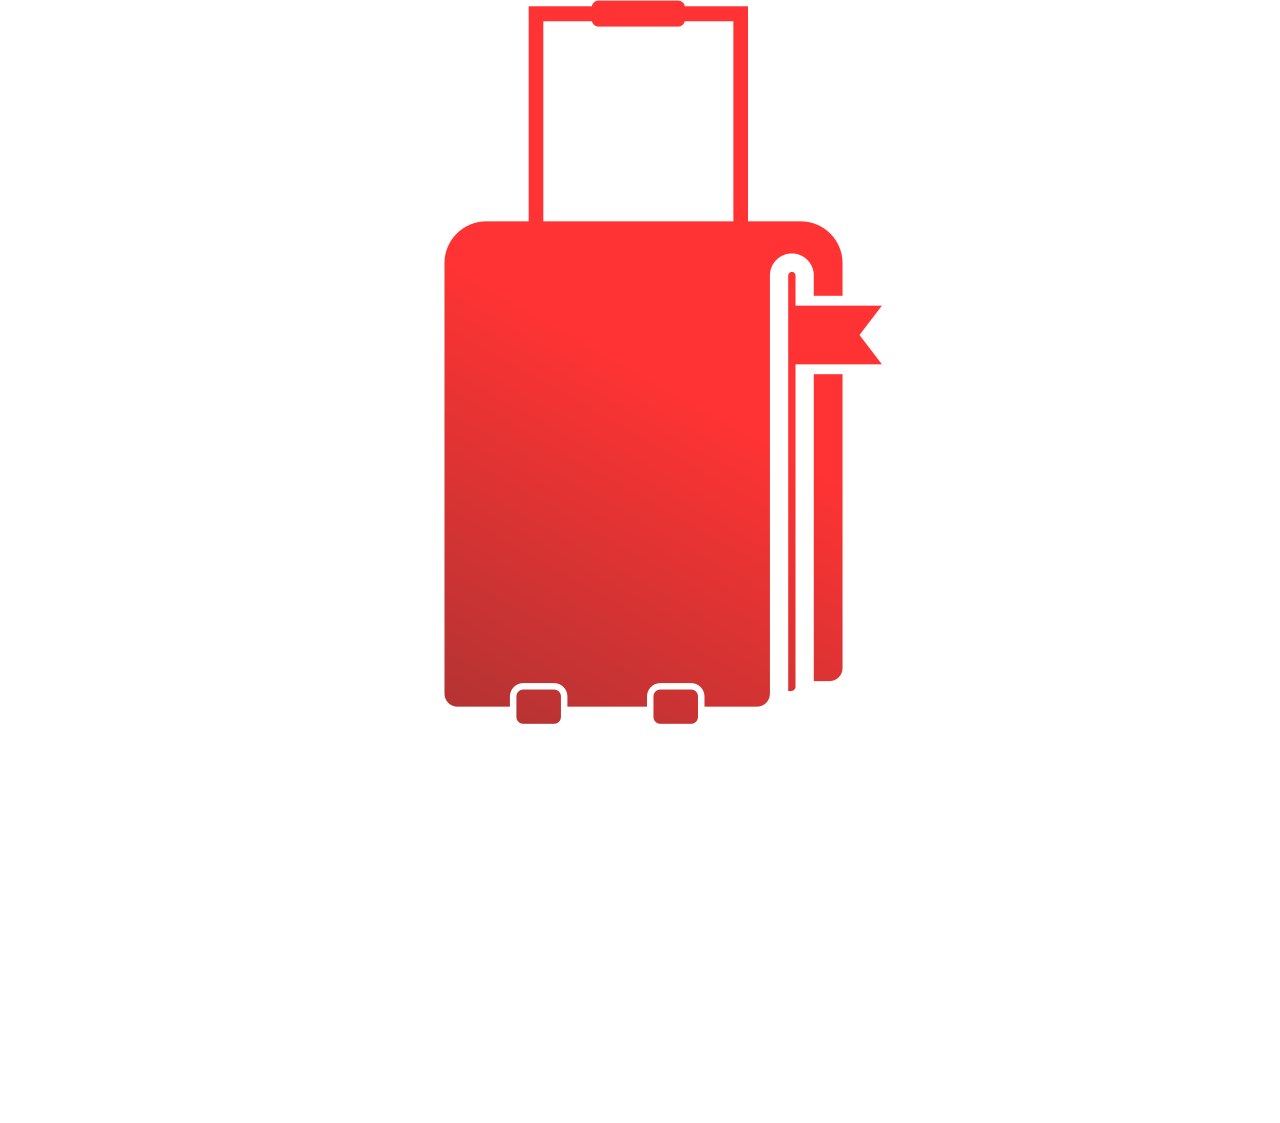 Luxe Concierge By Diana Sahli LLC's web page